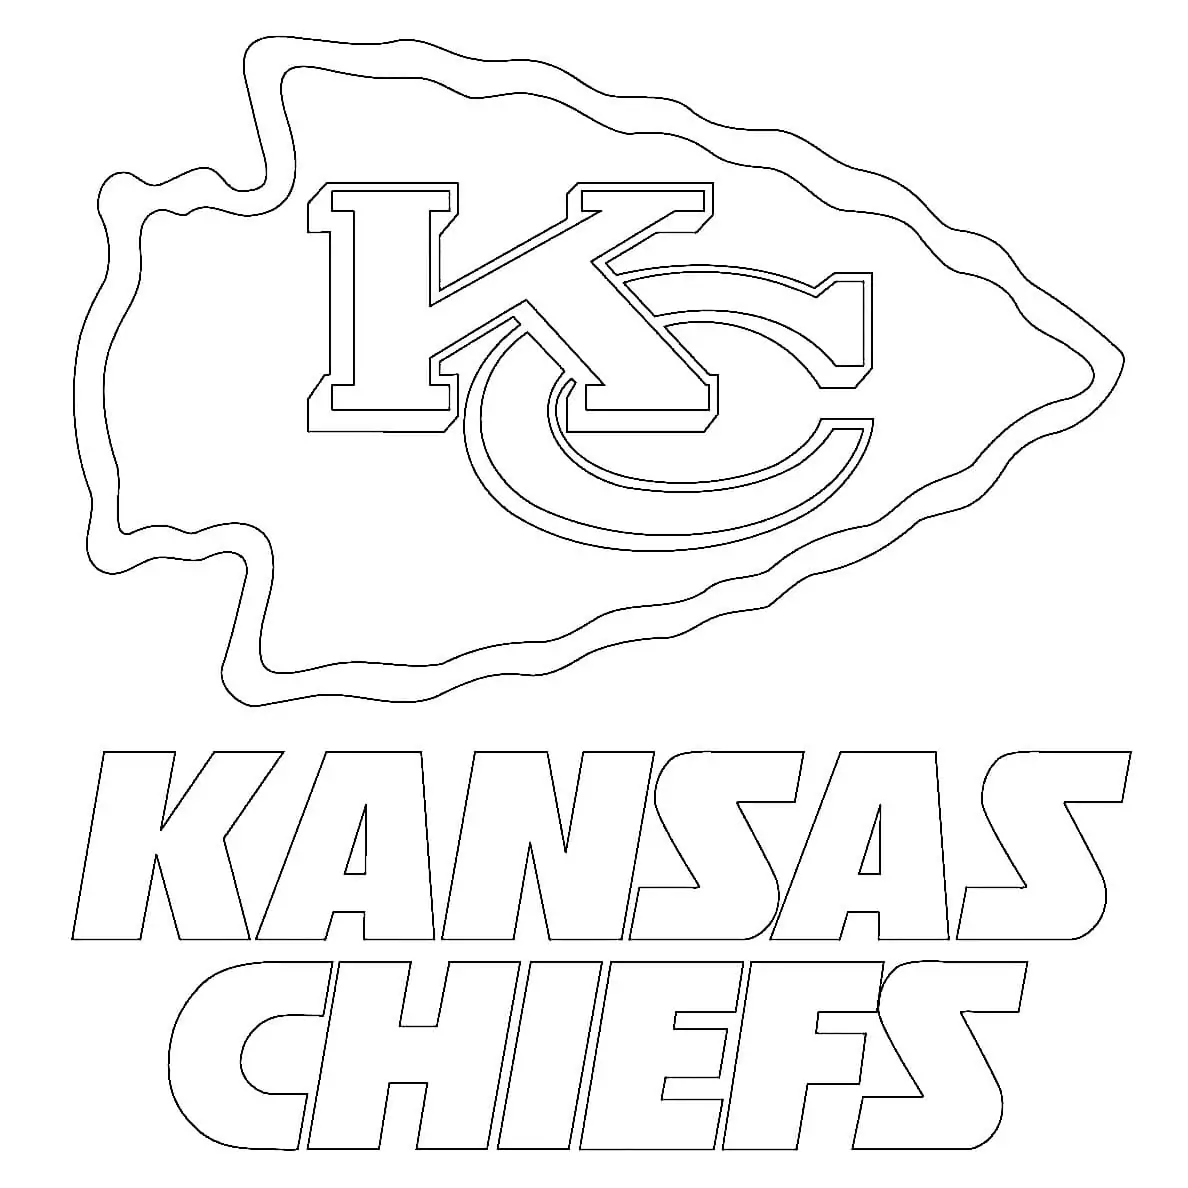 Patrick Mahomes Coloring Page - Free Printable Coloring Pages for Kids